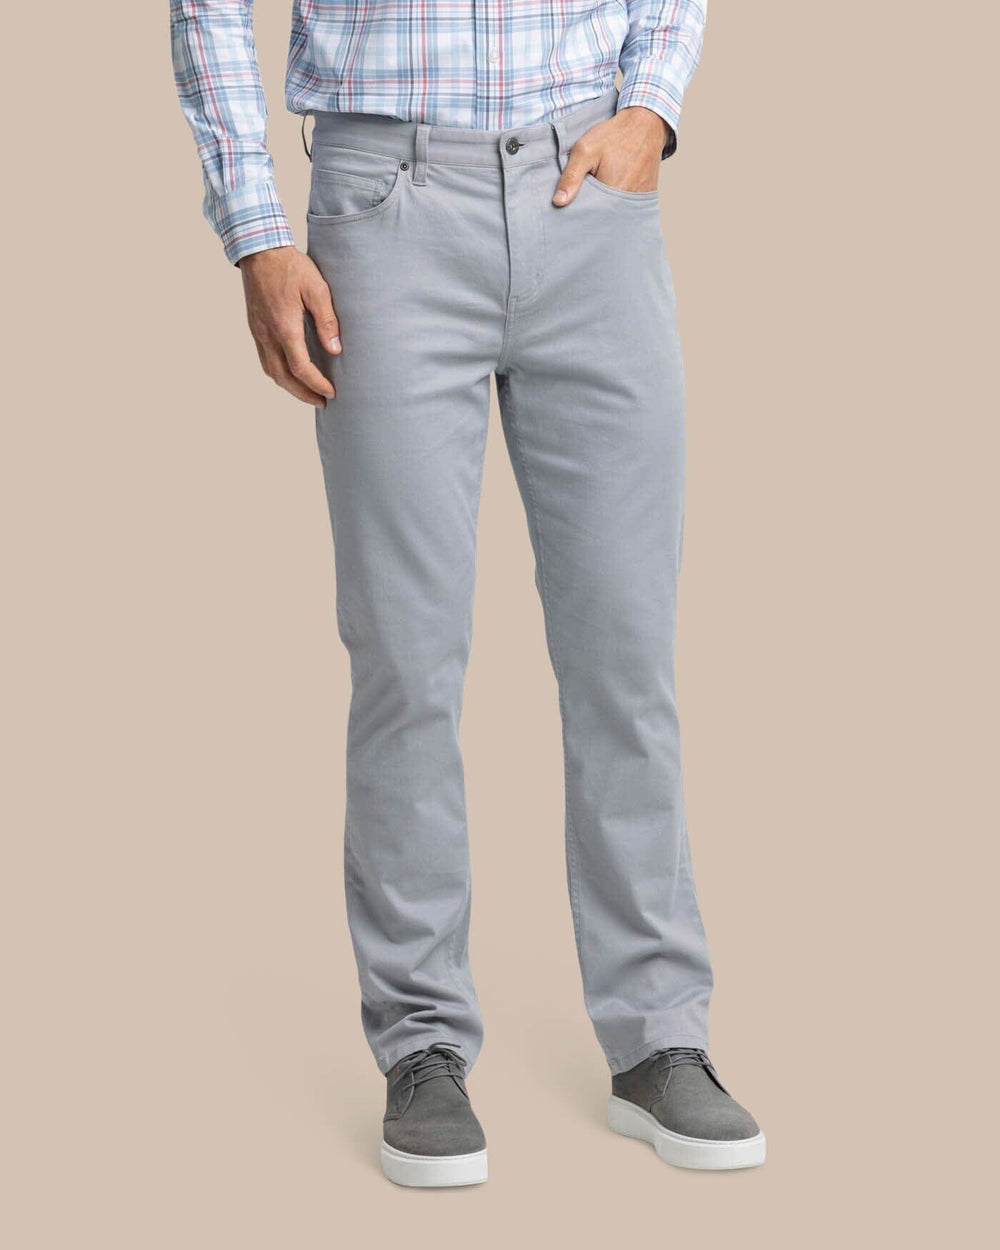 The front view of the Southern Tide Sullivan Five Pocket Pant by Southern Tide - Ultimate Grey